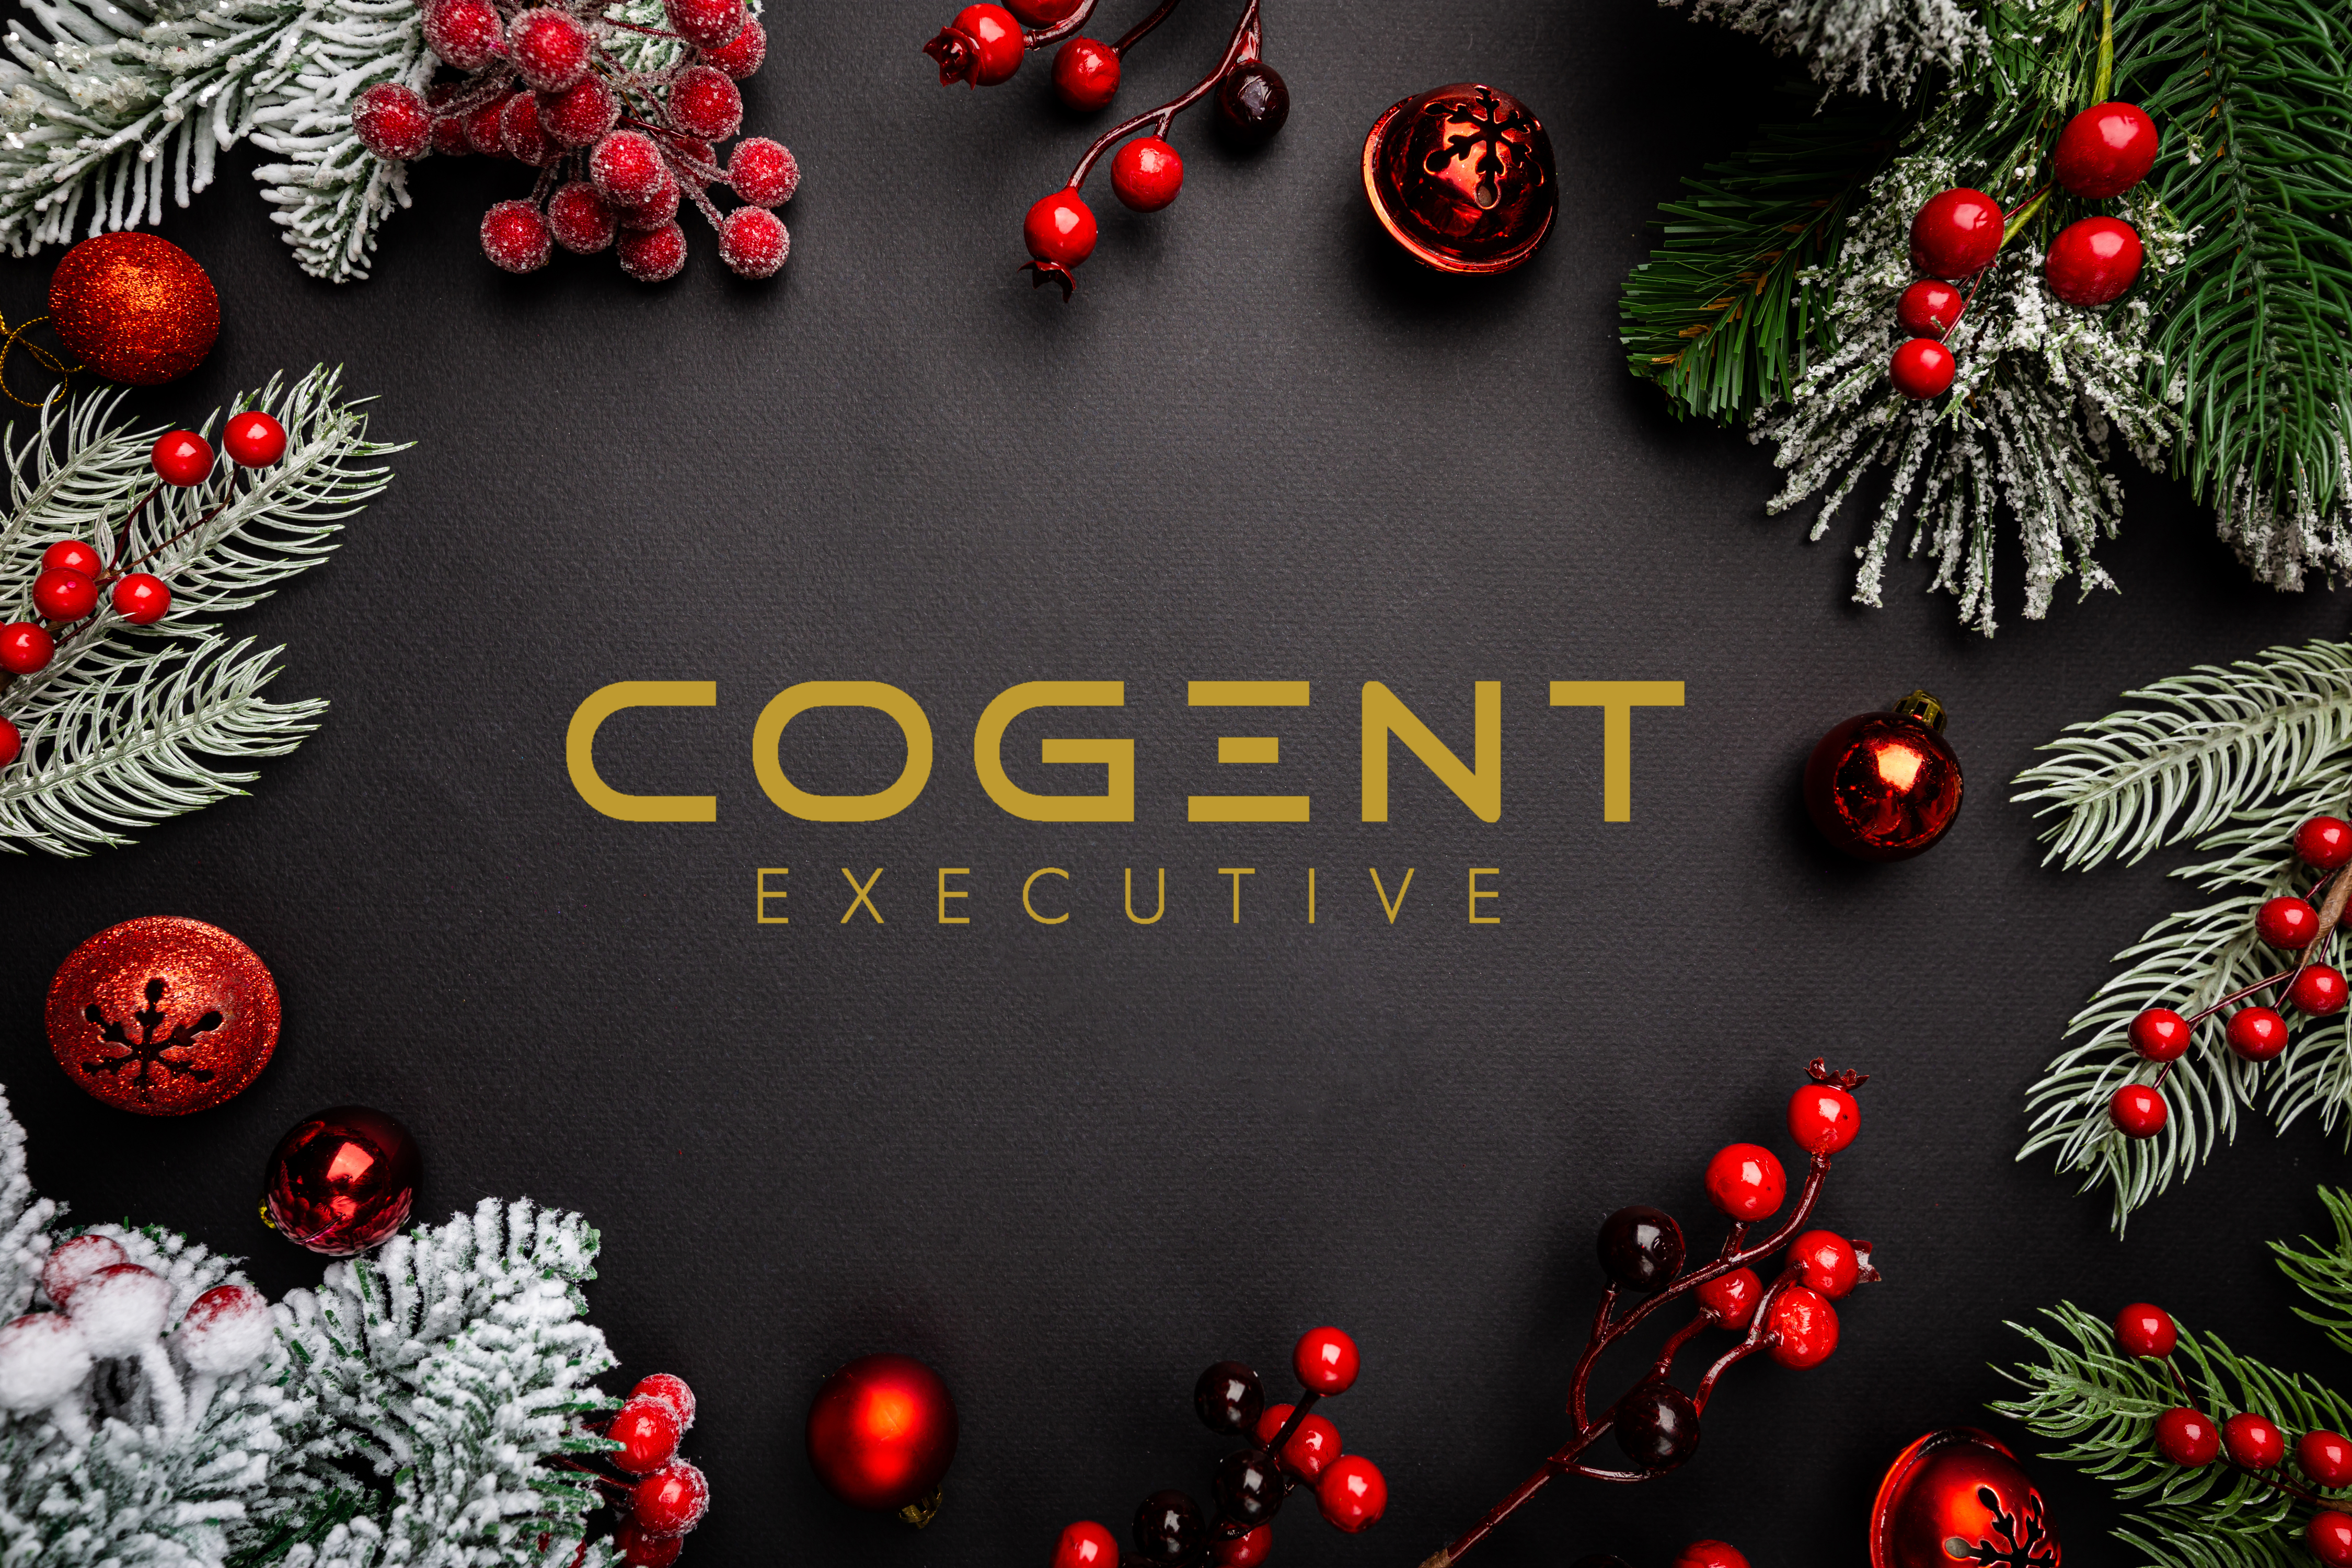 Mery Christmas image with the COGENT Executive Logo.